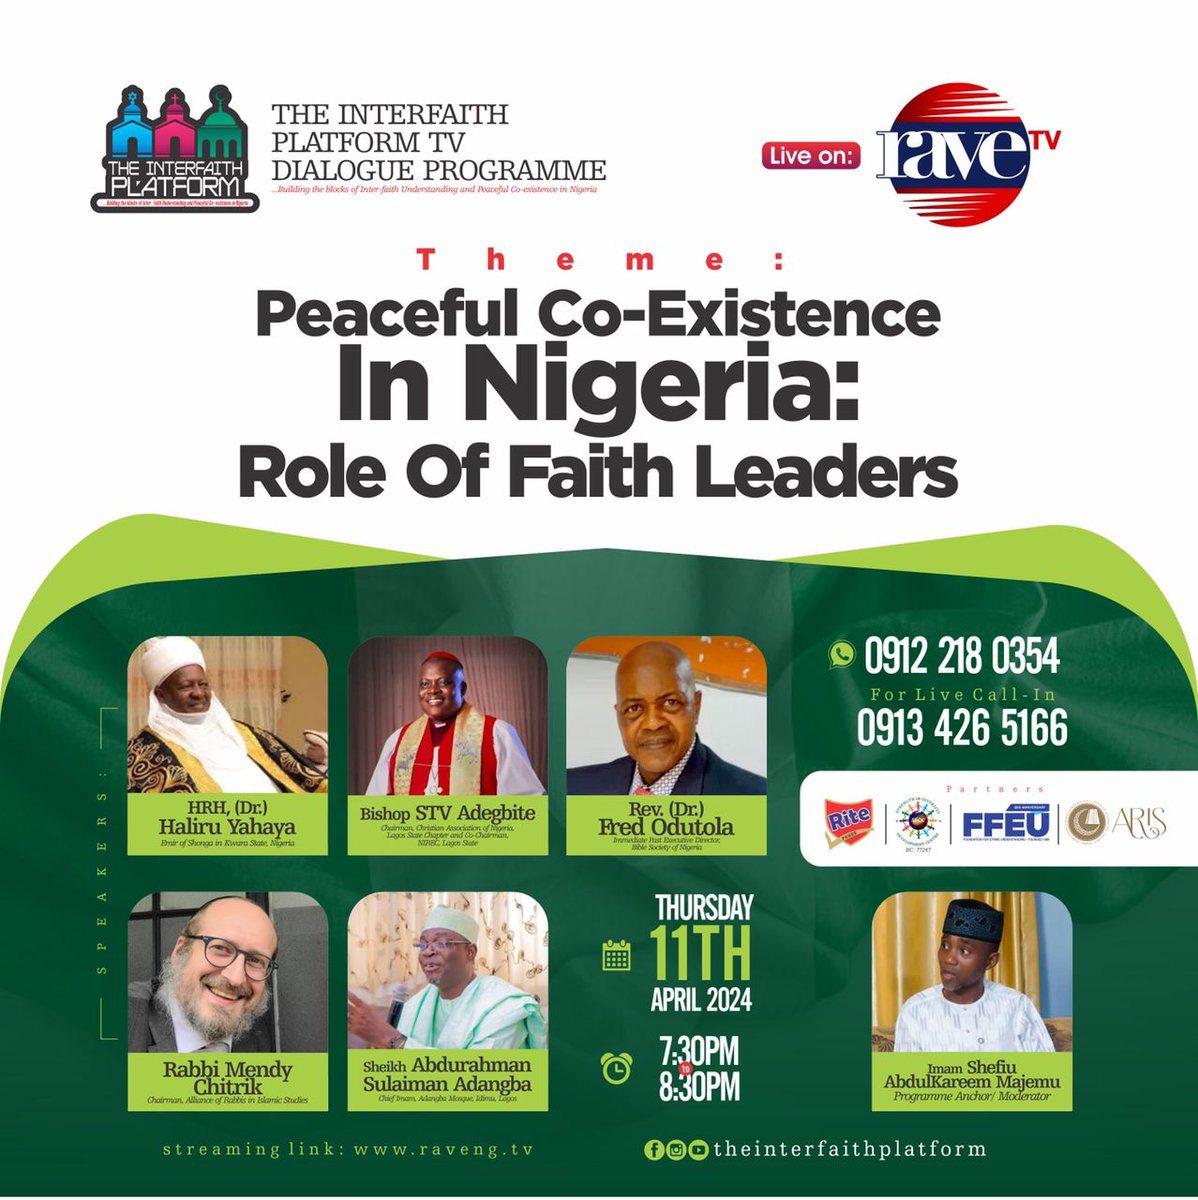 April 11 | 7:30-8:30pm, Lagos time The Interfaith platform TV Dialogue Program - an initiative led by our esteemed colleague Imam Abdulkareem Shefiu Majemu & co-sponsored by FFEU - is hosting 'Peaceful coexistence in Nigeria: Role of Religious leaders'. @RabbisAlliance @mchitrik